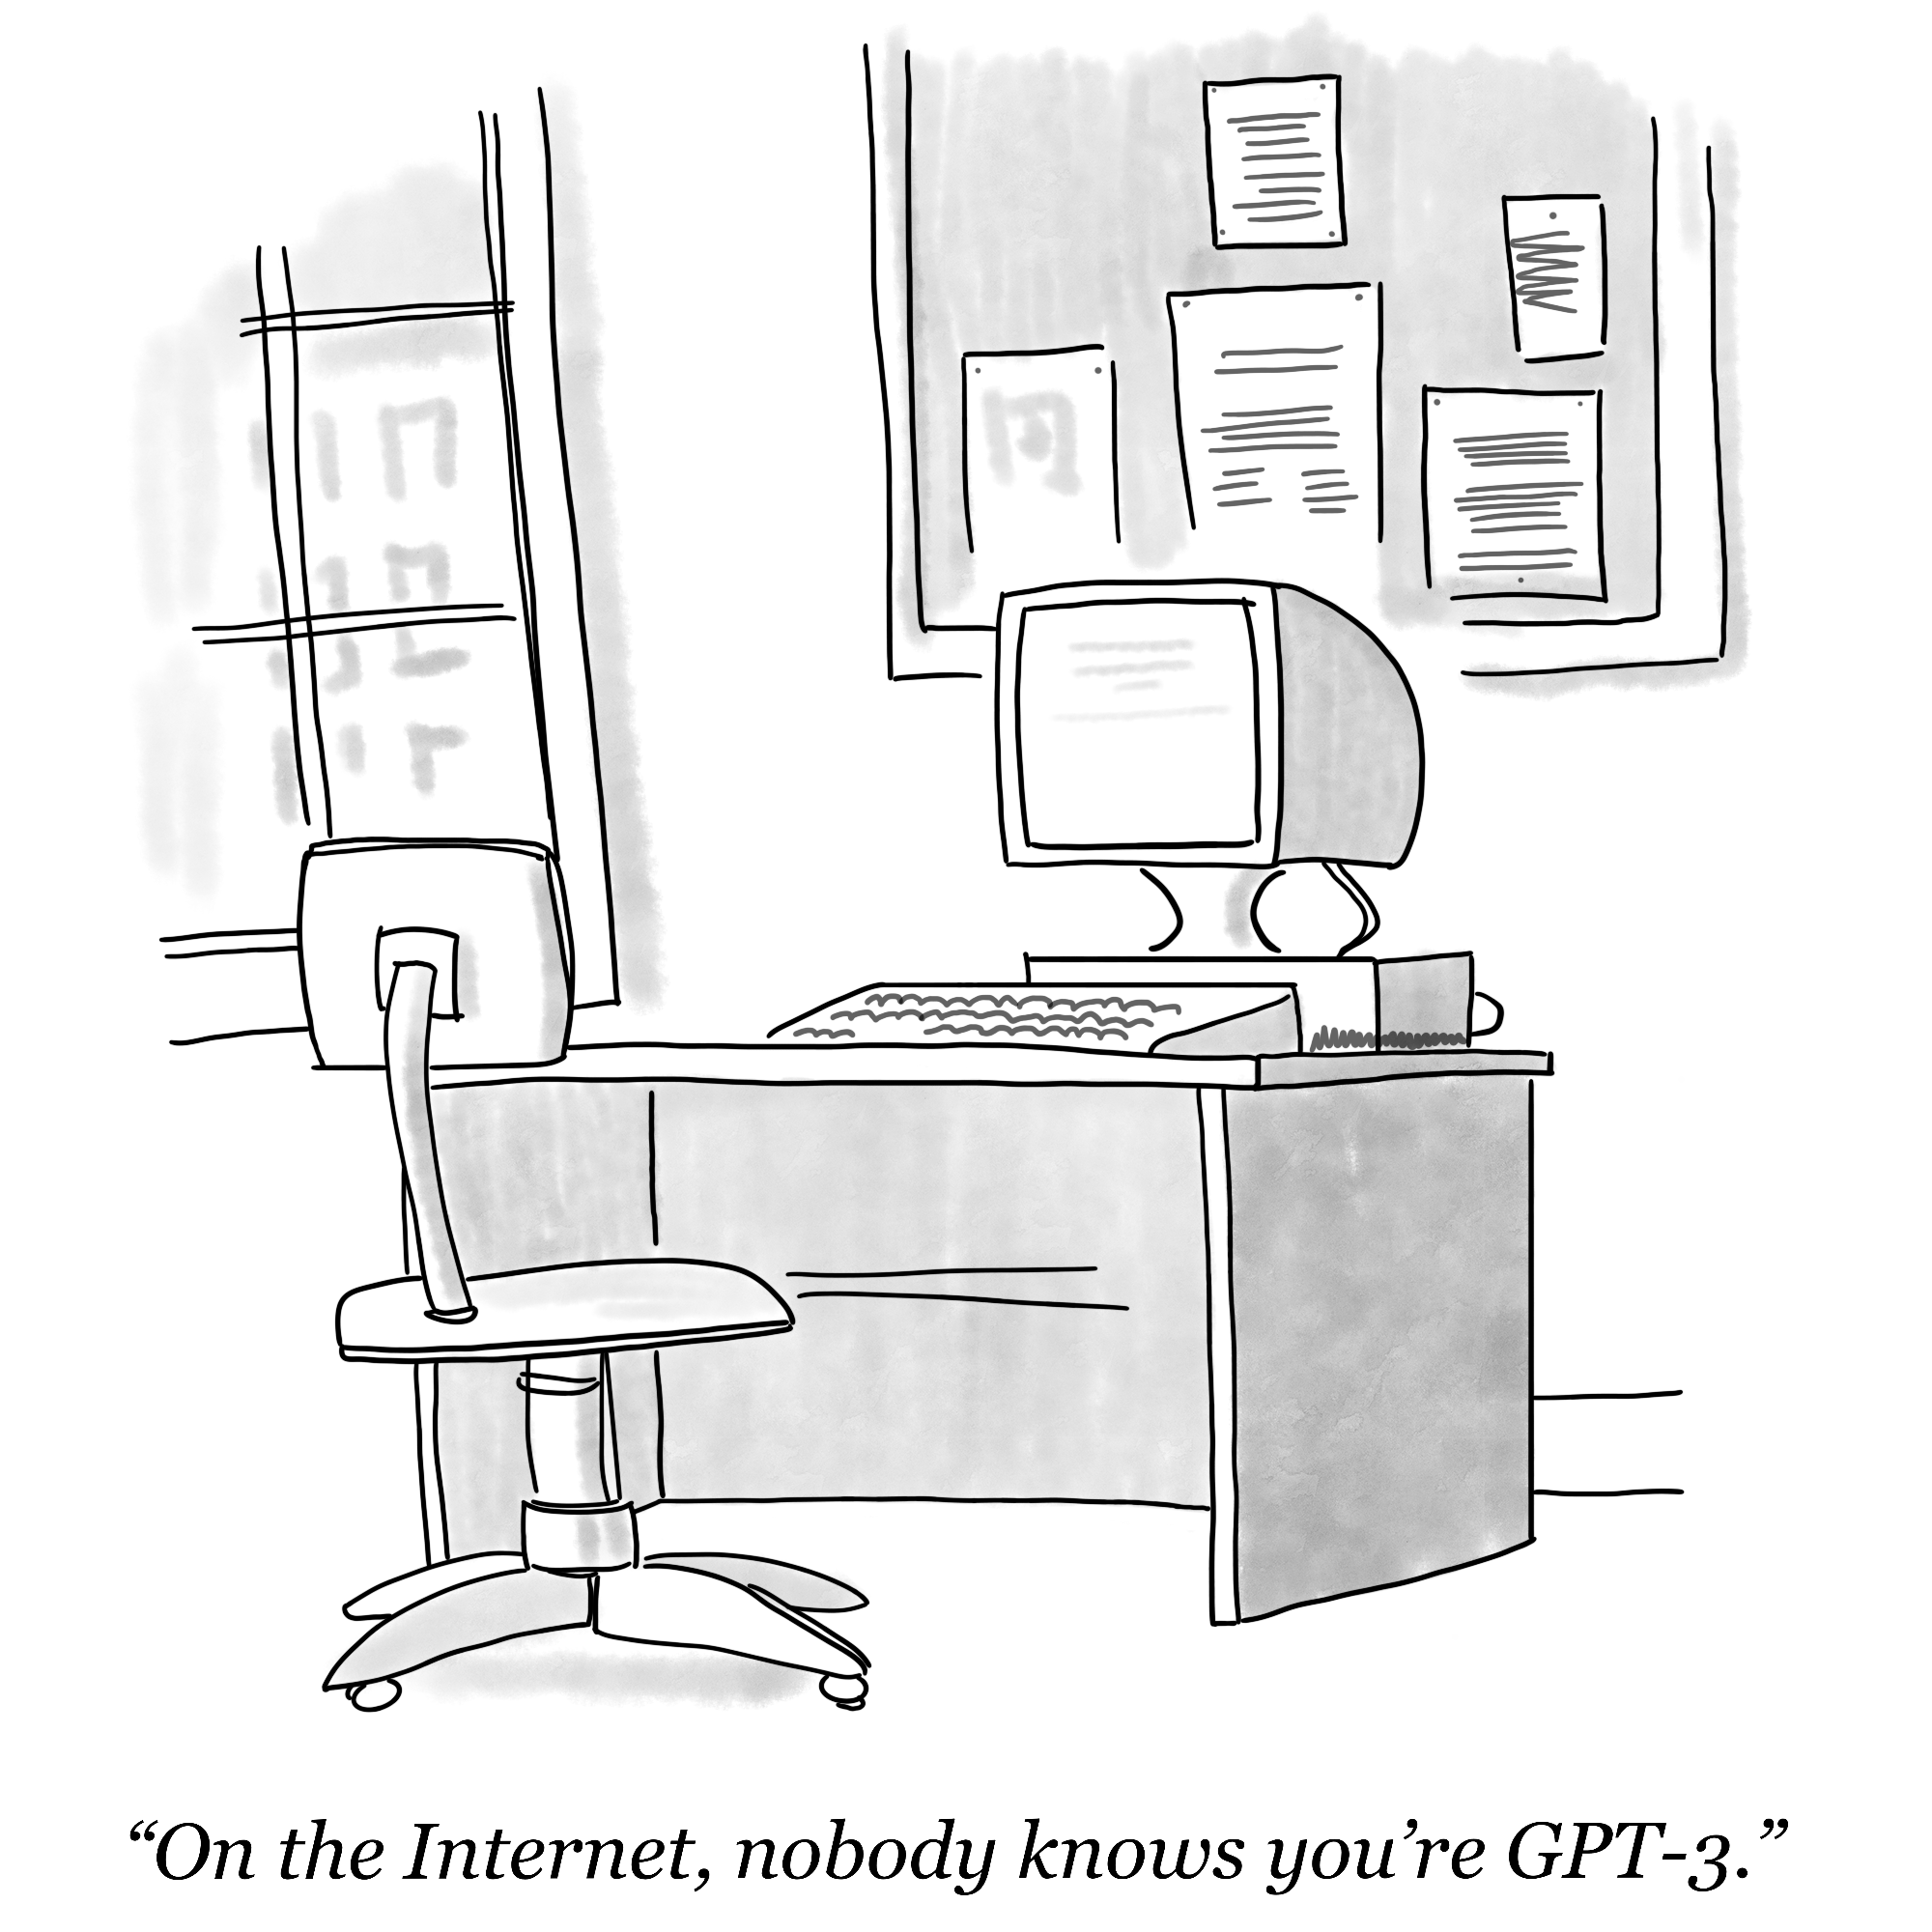 Inspired by Peter Steiner&rsquo;s cartoon: On the Internet, nobody knows you&rsquo;re a dog.